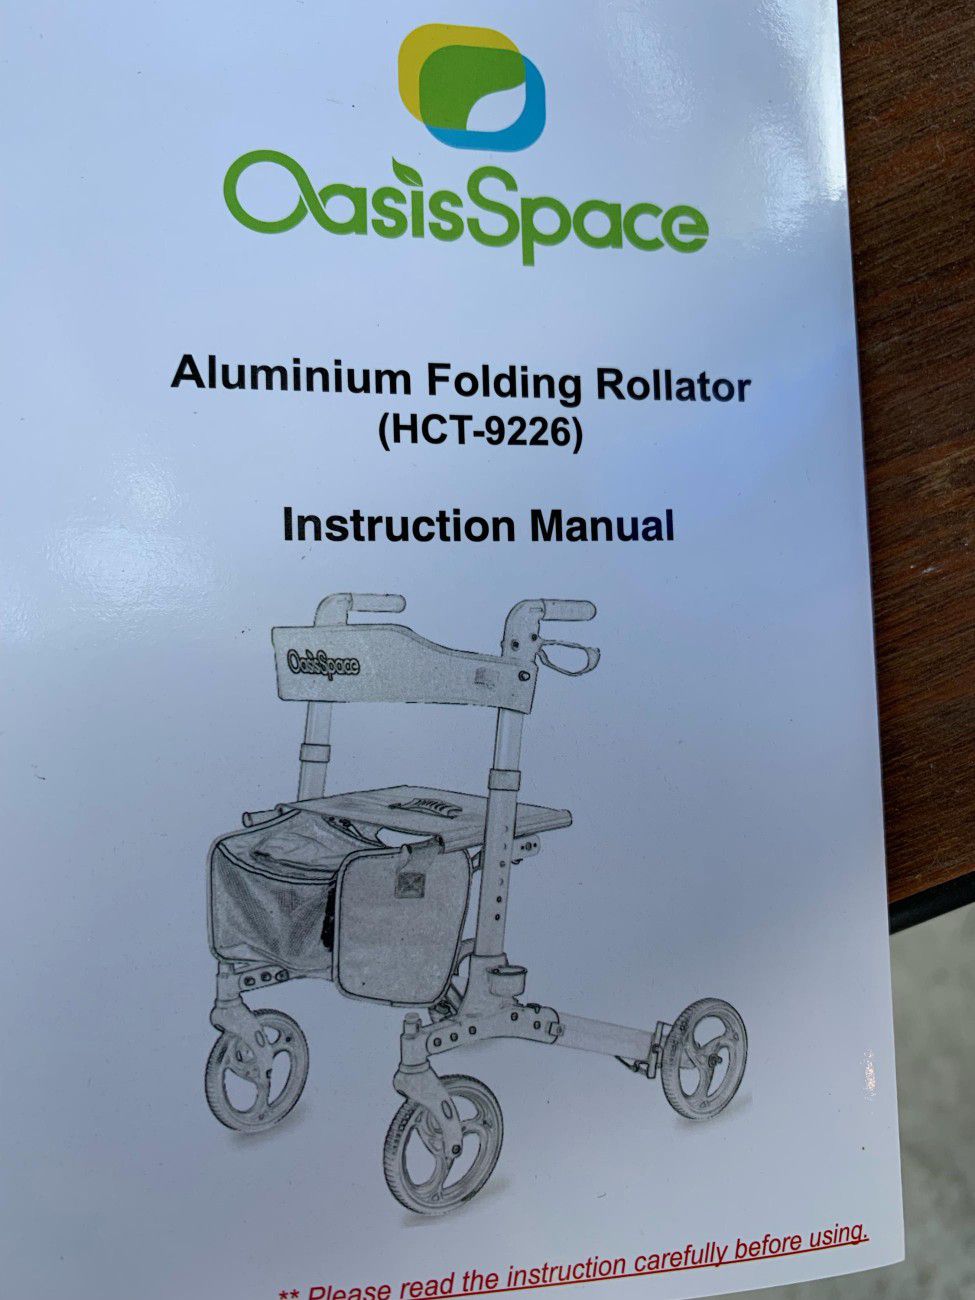 Brand new oasis space folding rollator